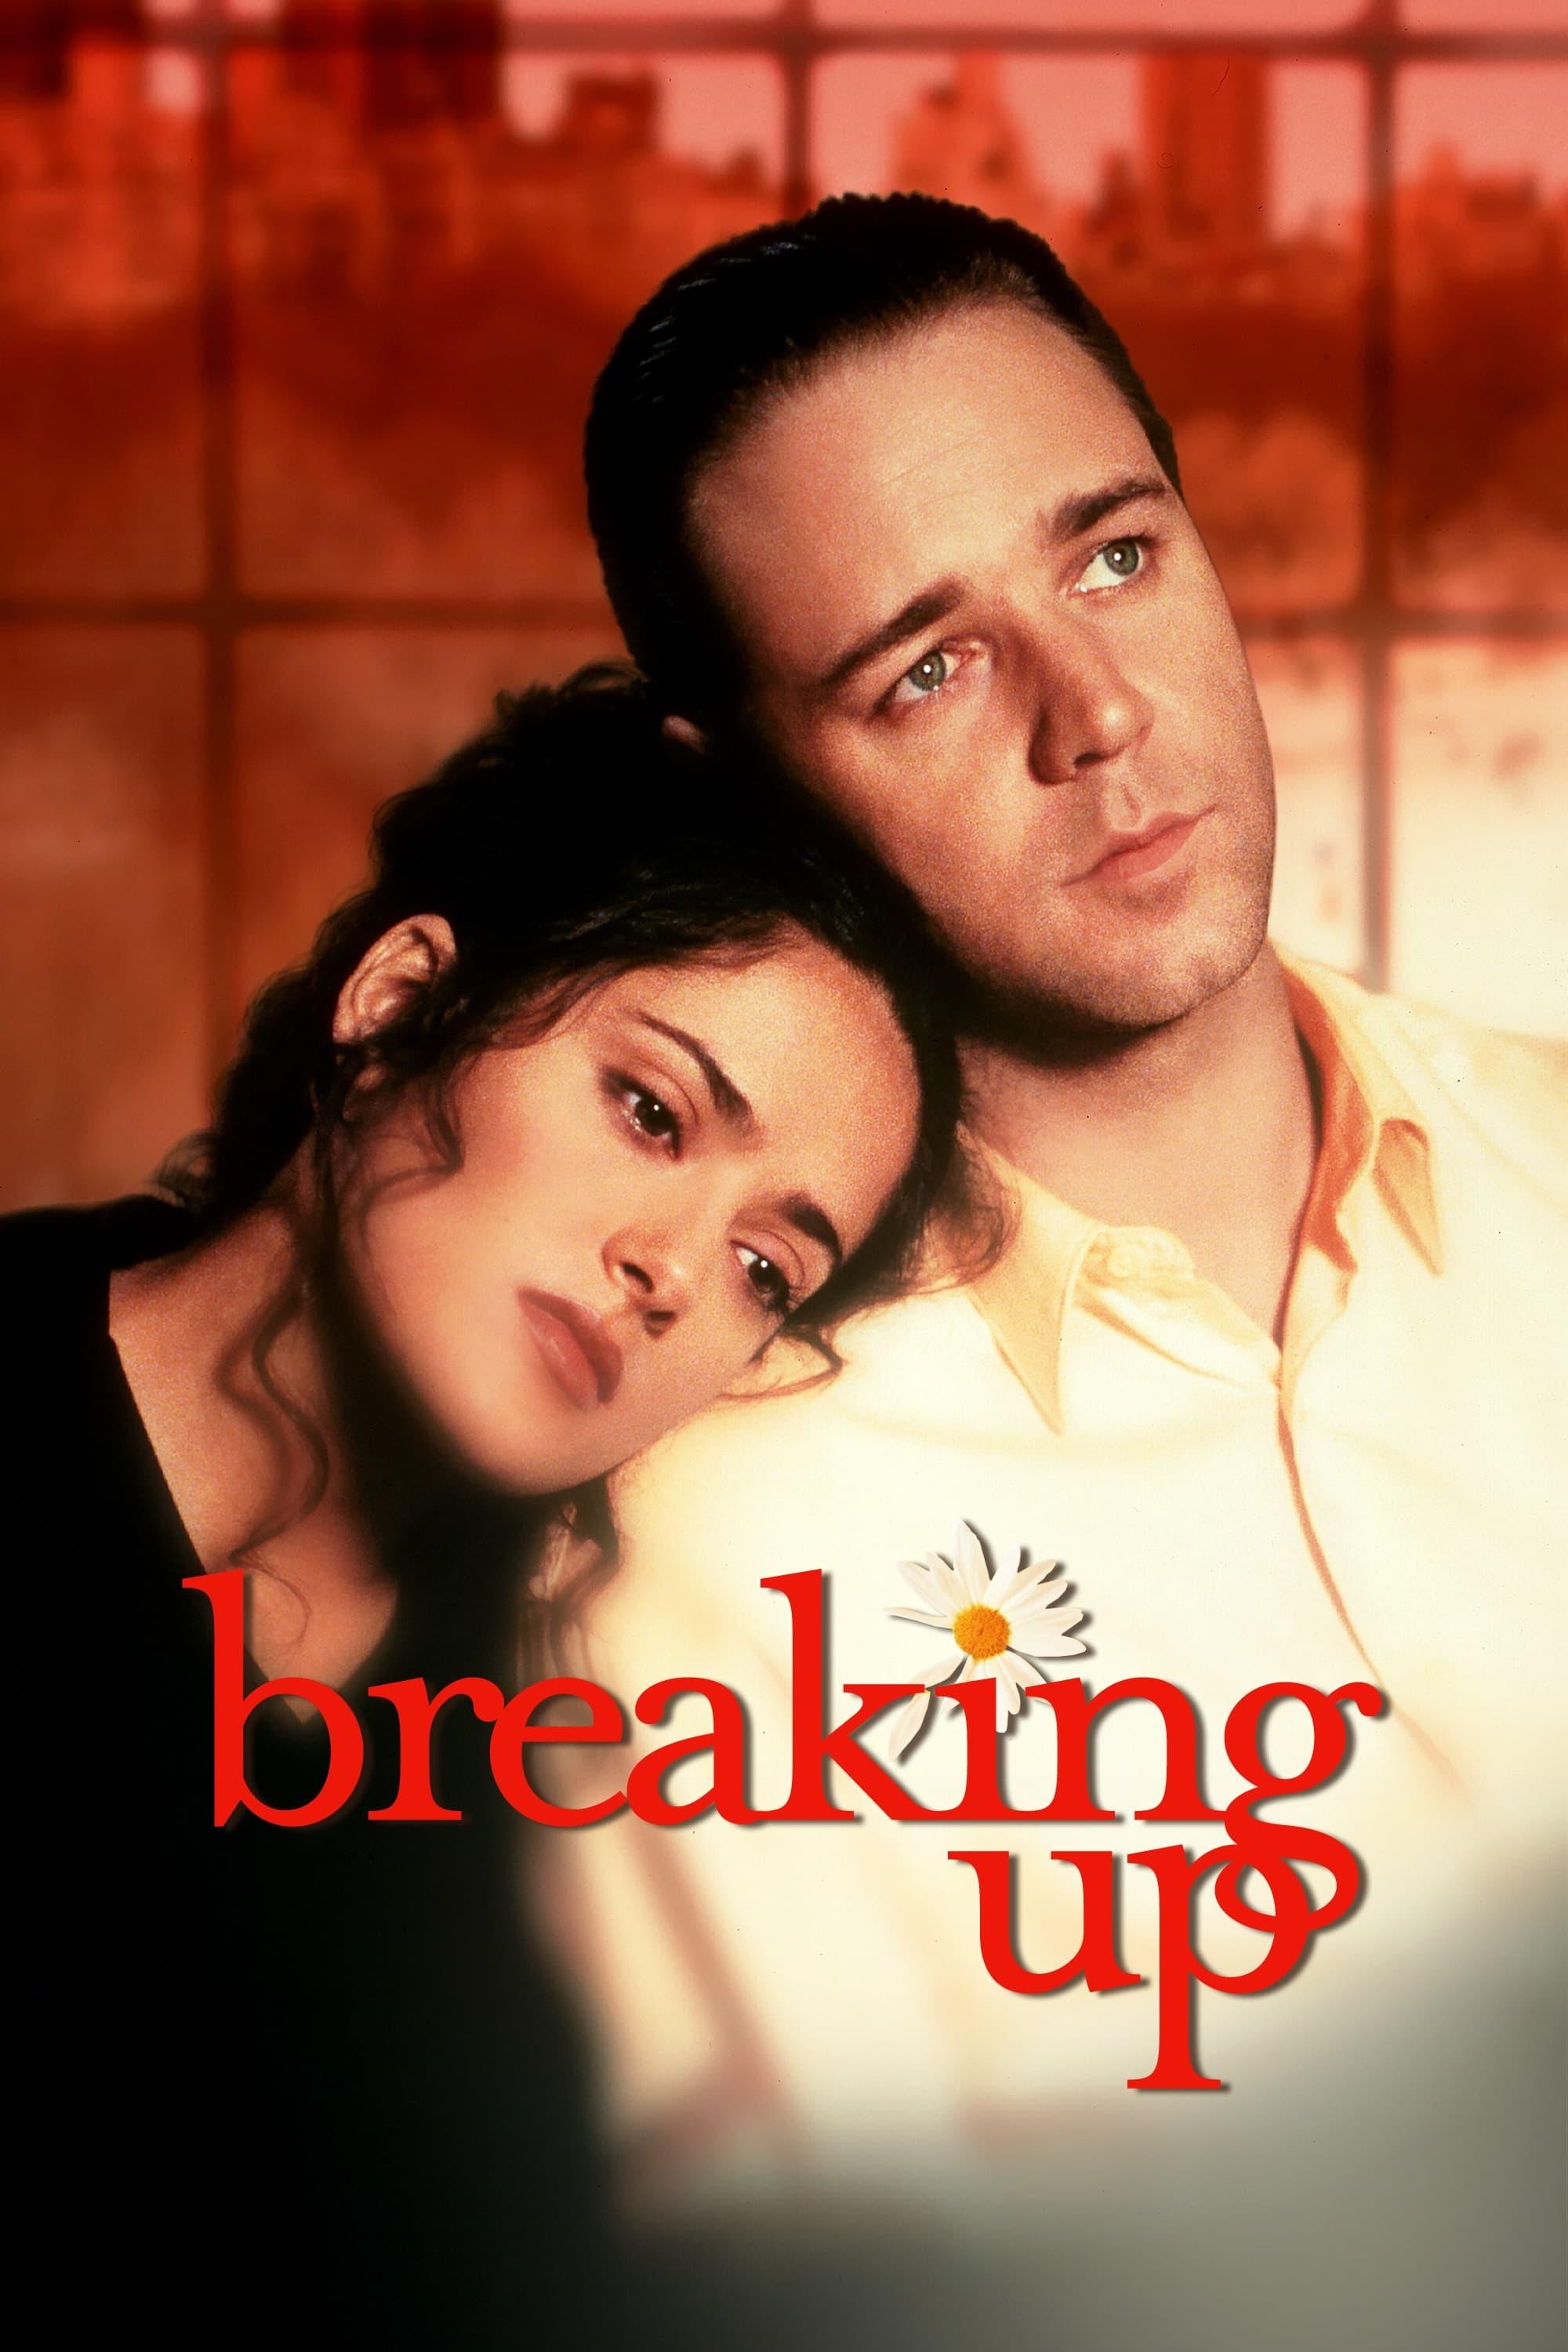 Breaking Up poster